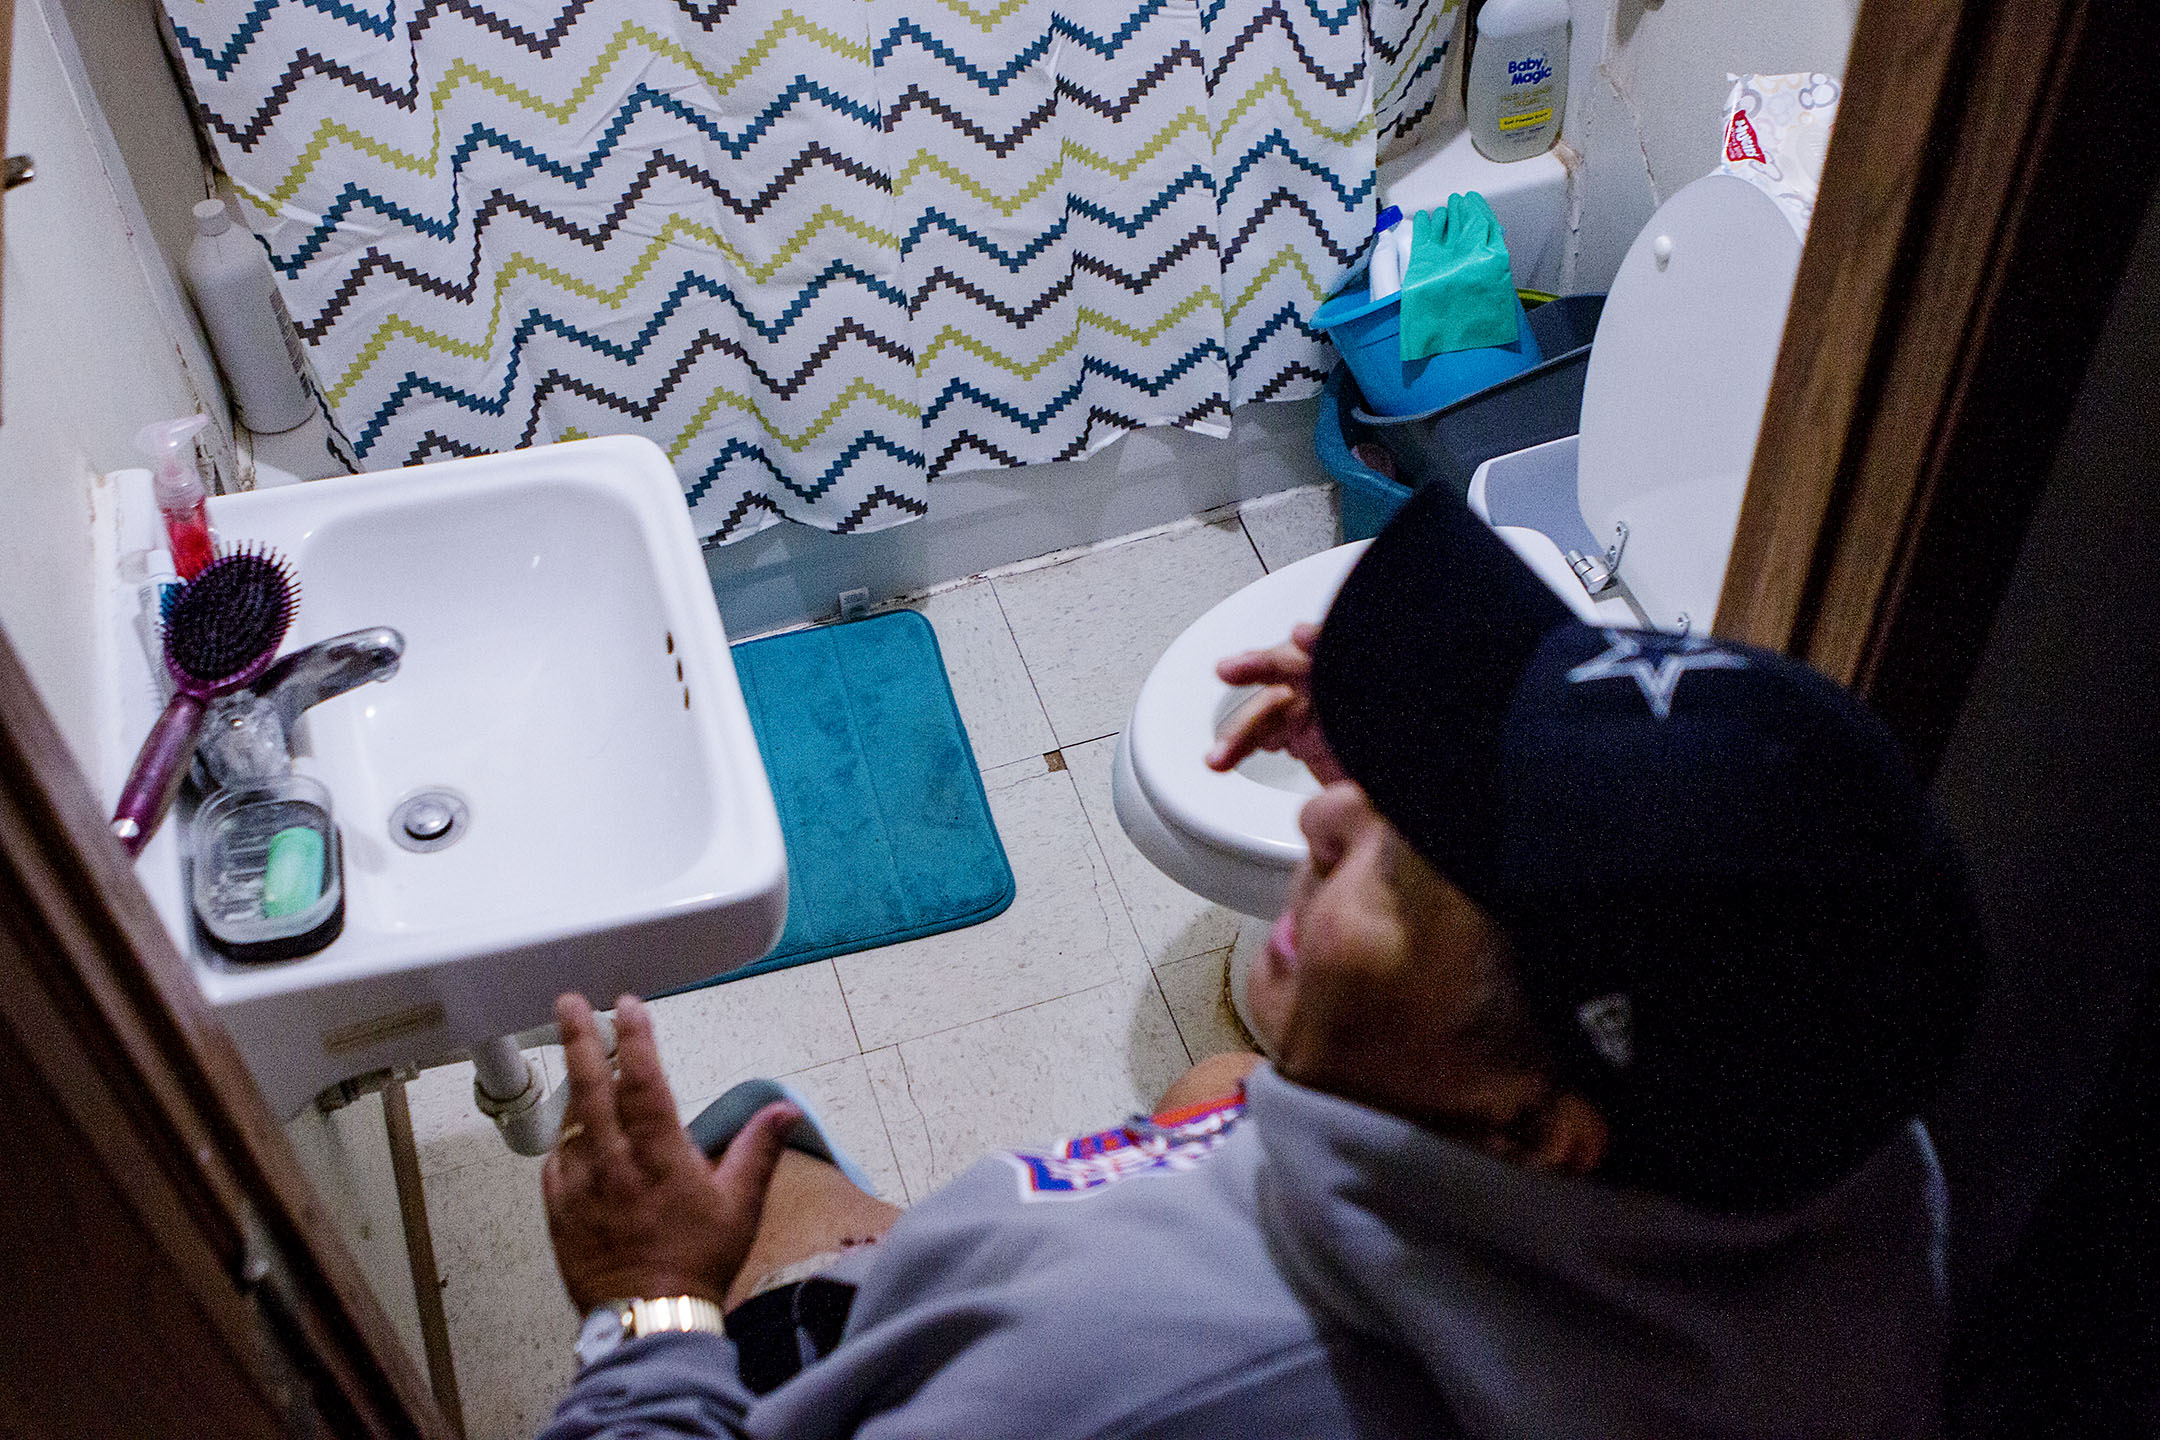 As a double amputee, Old Mouse has a hard time navigating his small bathroom. He is seeking funding for a new handicapped-accessible bathroom to help him manage everyday life.